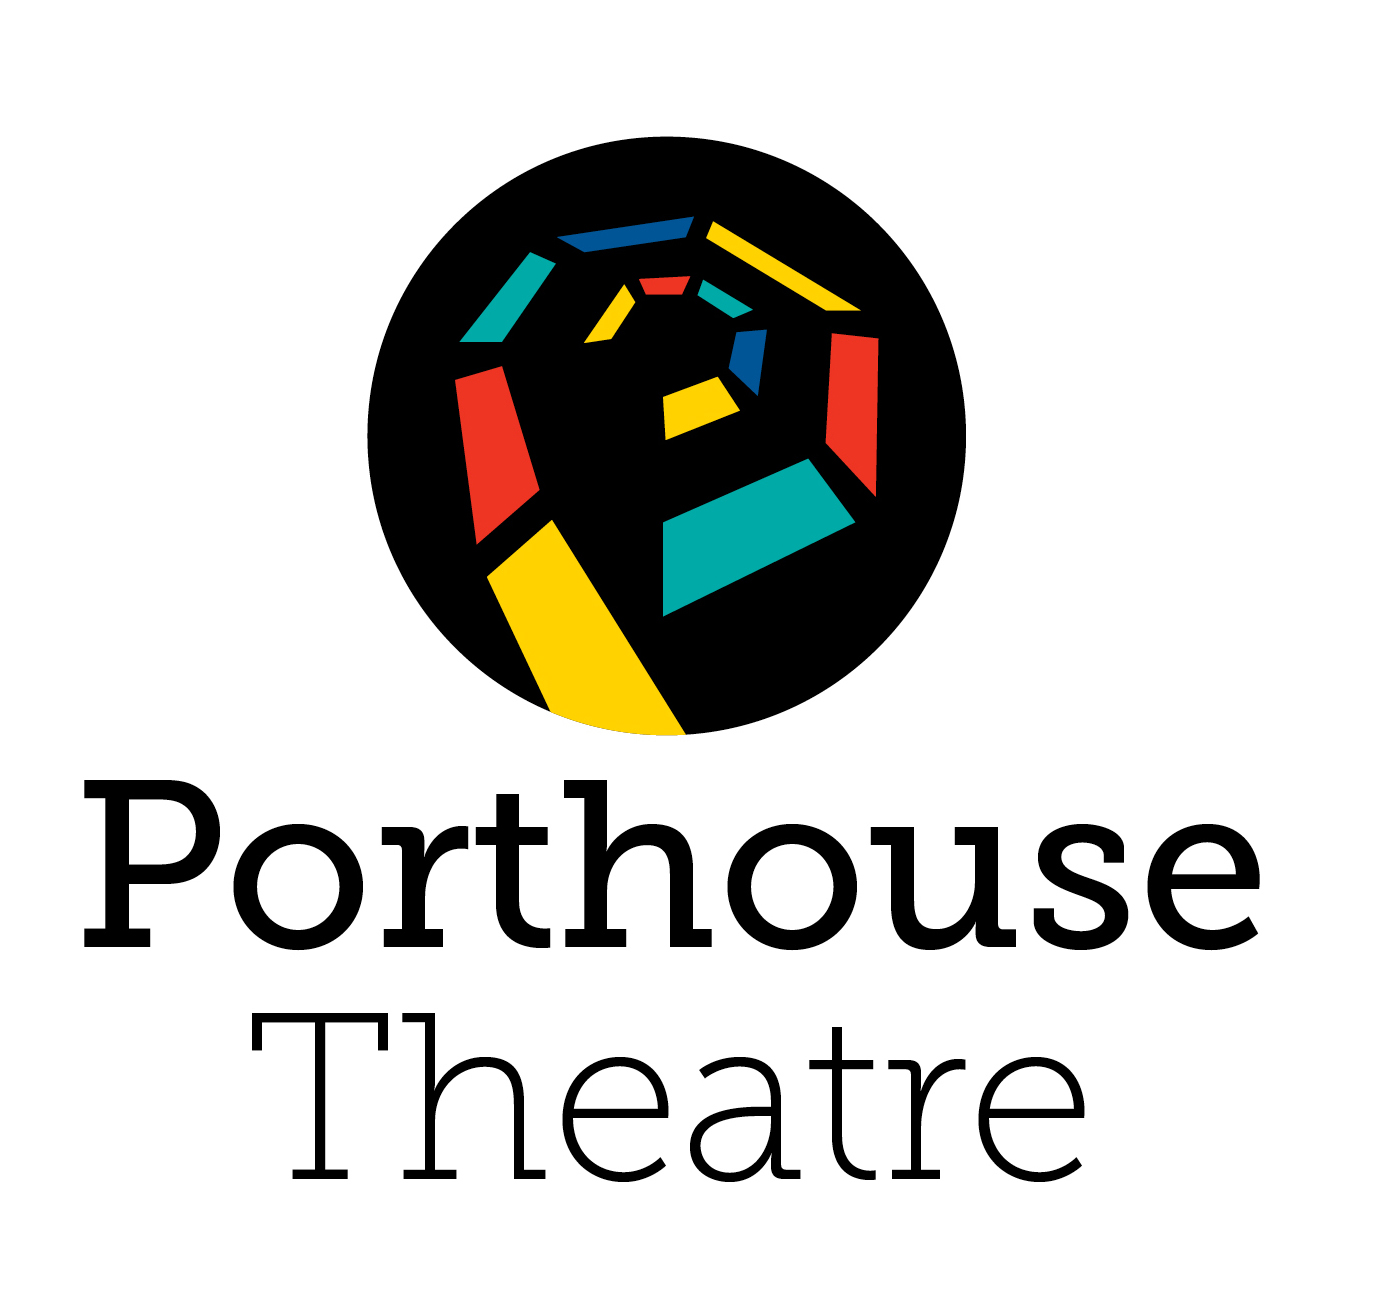 Porthouse Theatre Theater Backstage